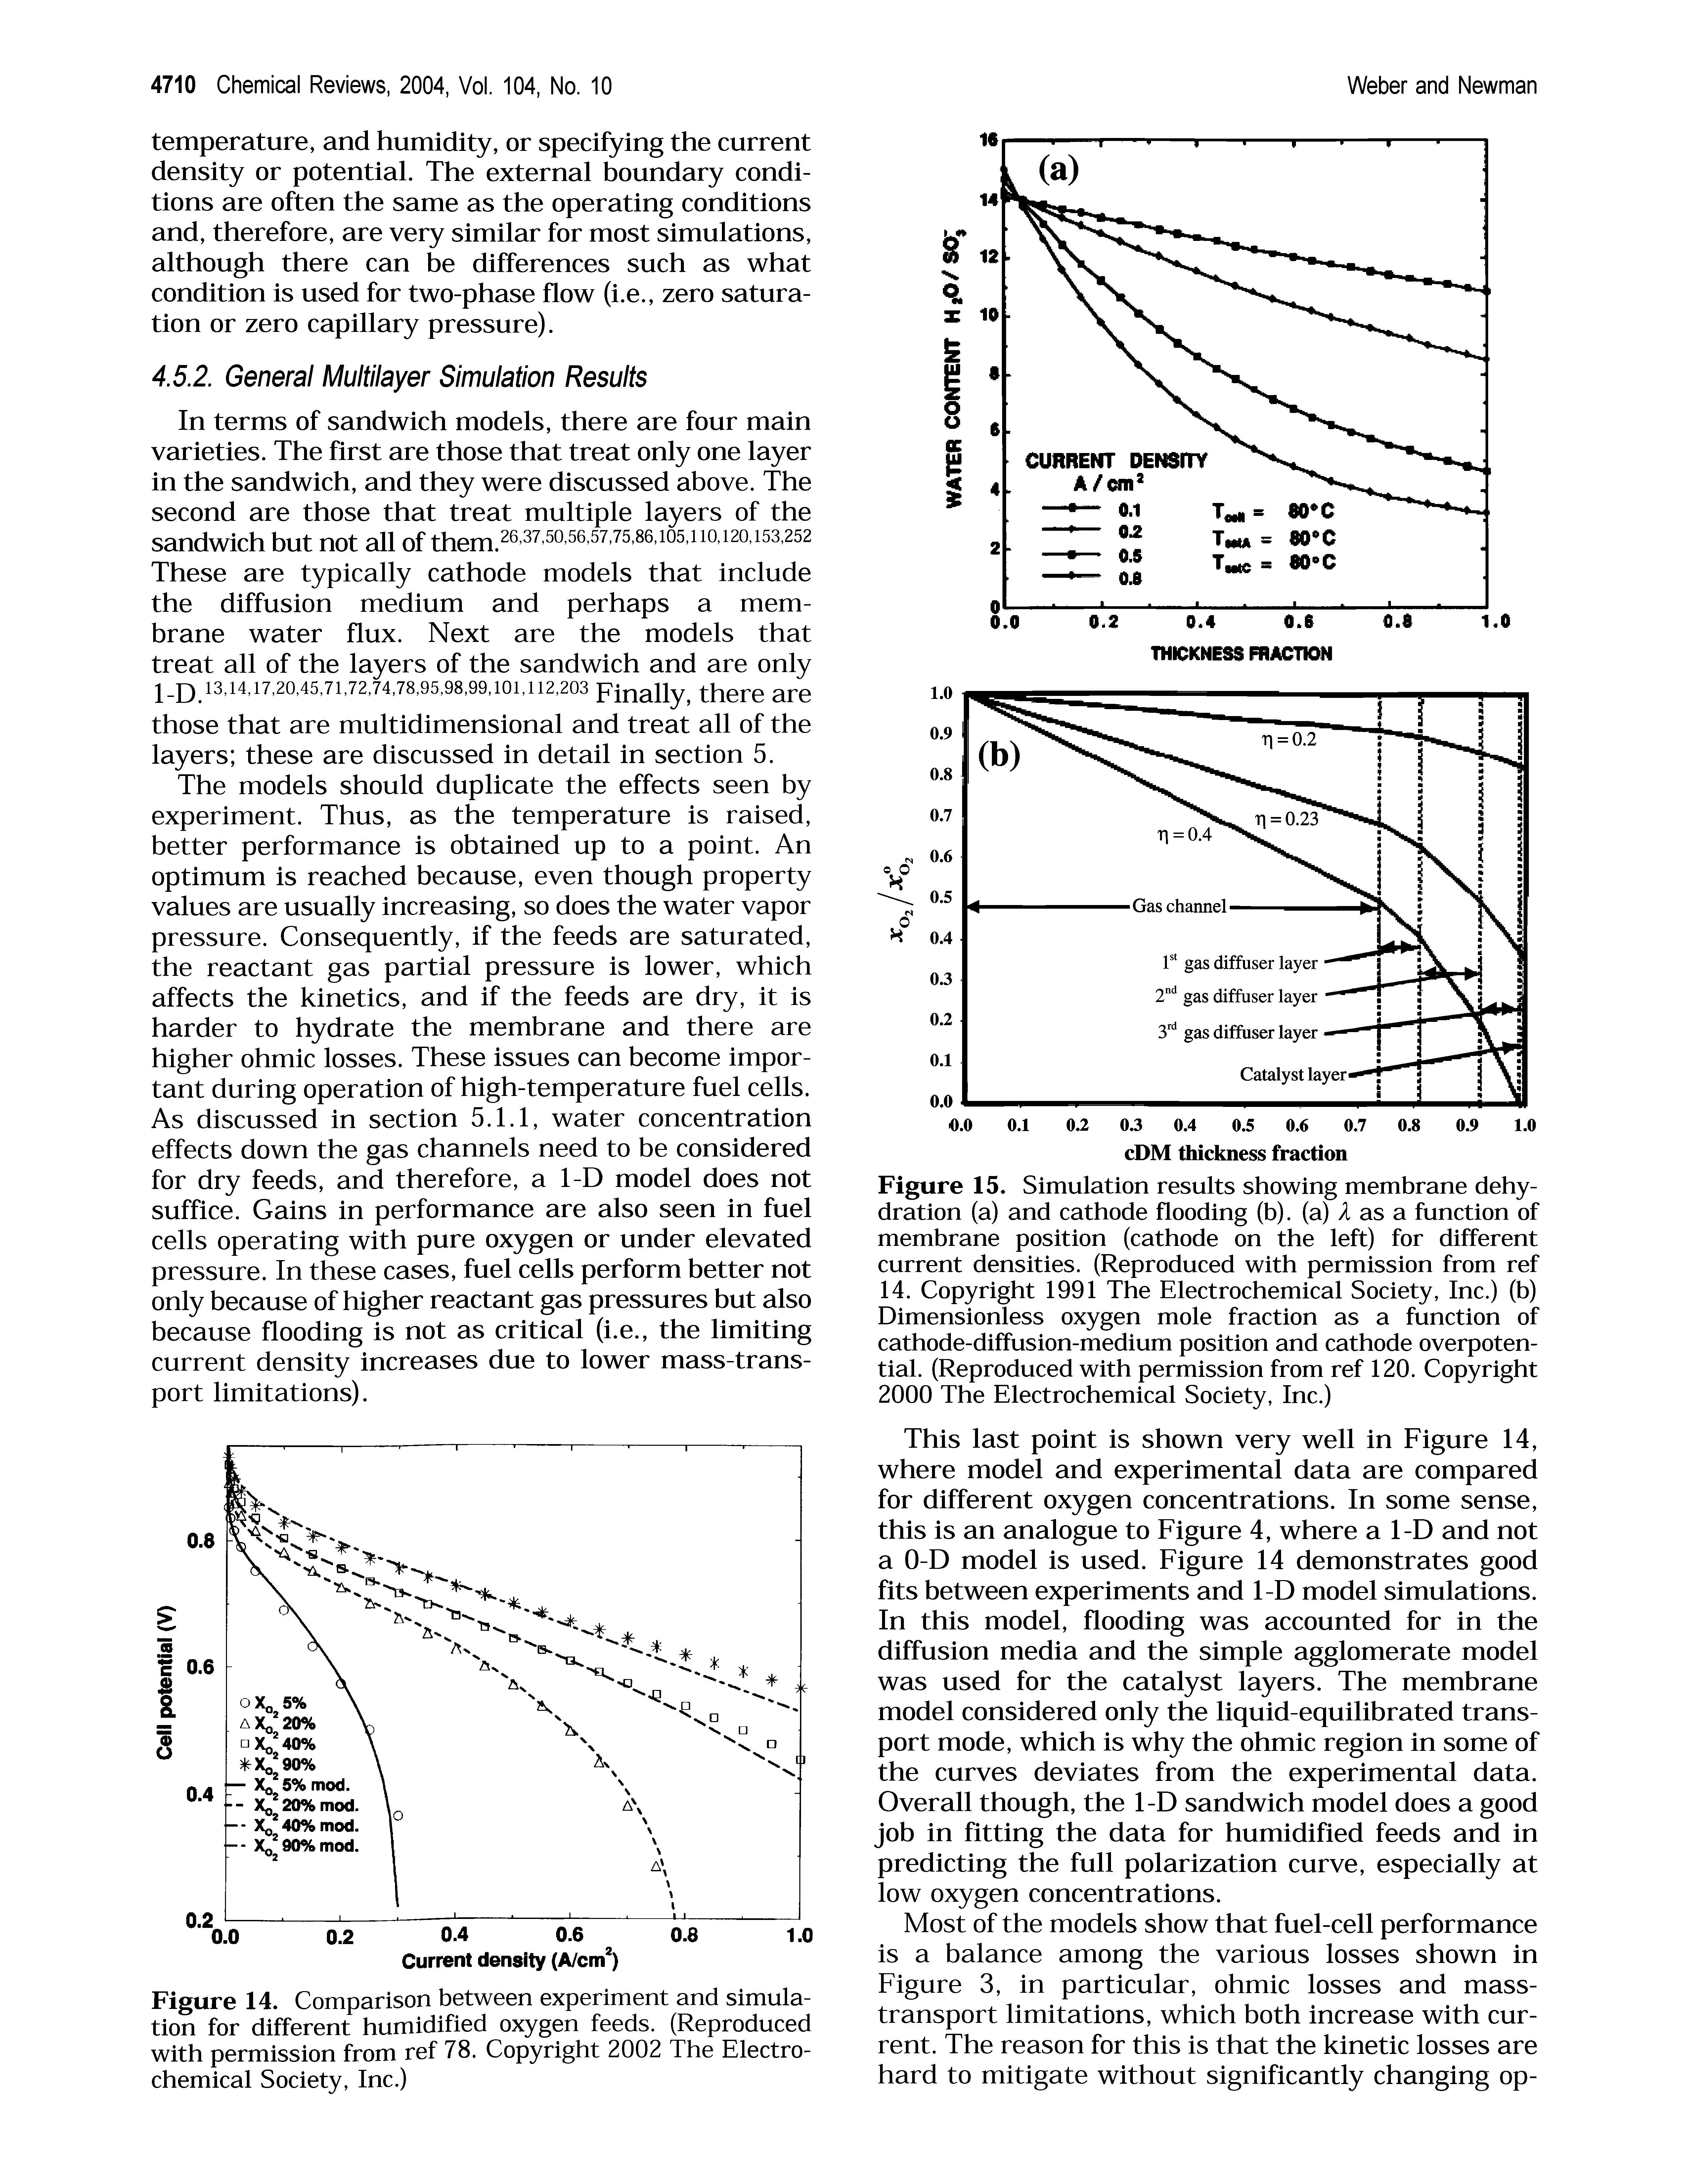 Figure 15. Simulation results showing membrane dehydration (a) and cathode flooding (b). (a) 1 as a function of membrane position (cathode on the left) for different current densities. (Reproduced with permission from ref 14. Copyright 1991 The Electrochemical Society, Inc.) (b) Dimensionless oxygen mole fraction as a function of cathode-diffusion-medium position and cathode overpotential. (Reproduced with permission from ref 120. Copyright 2000 The Electrochemical Society, Inc.)...